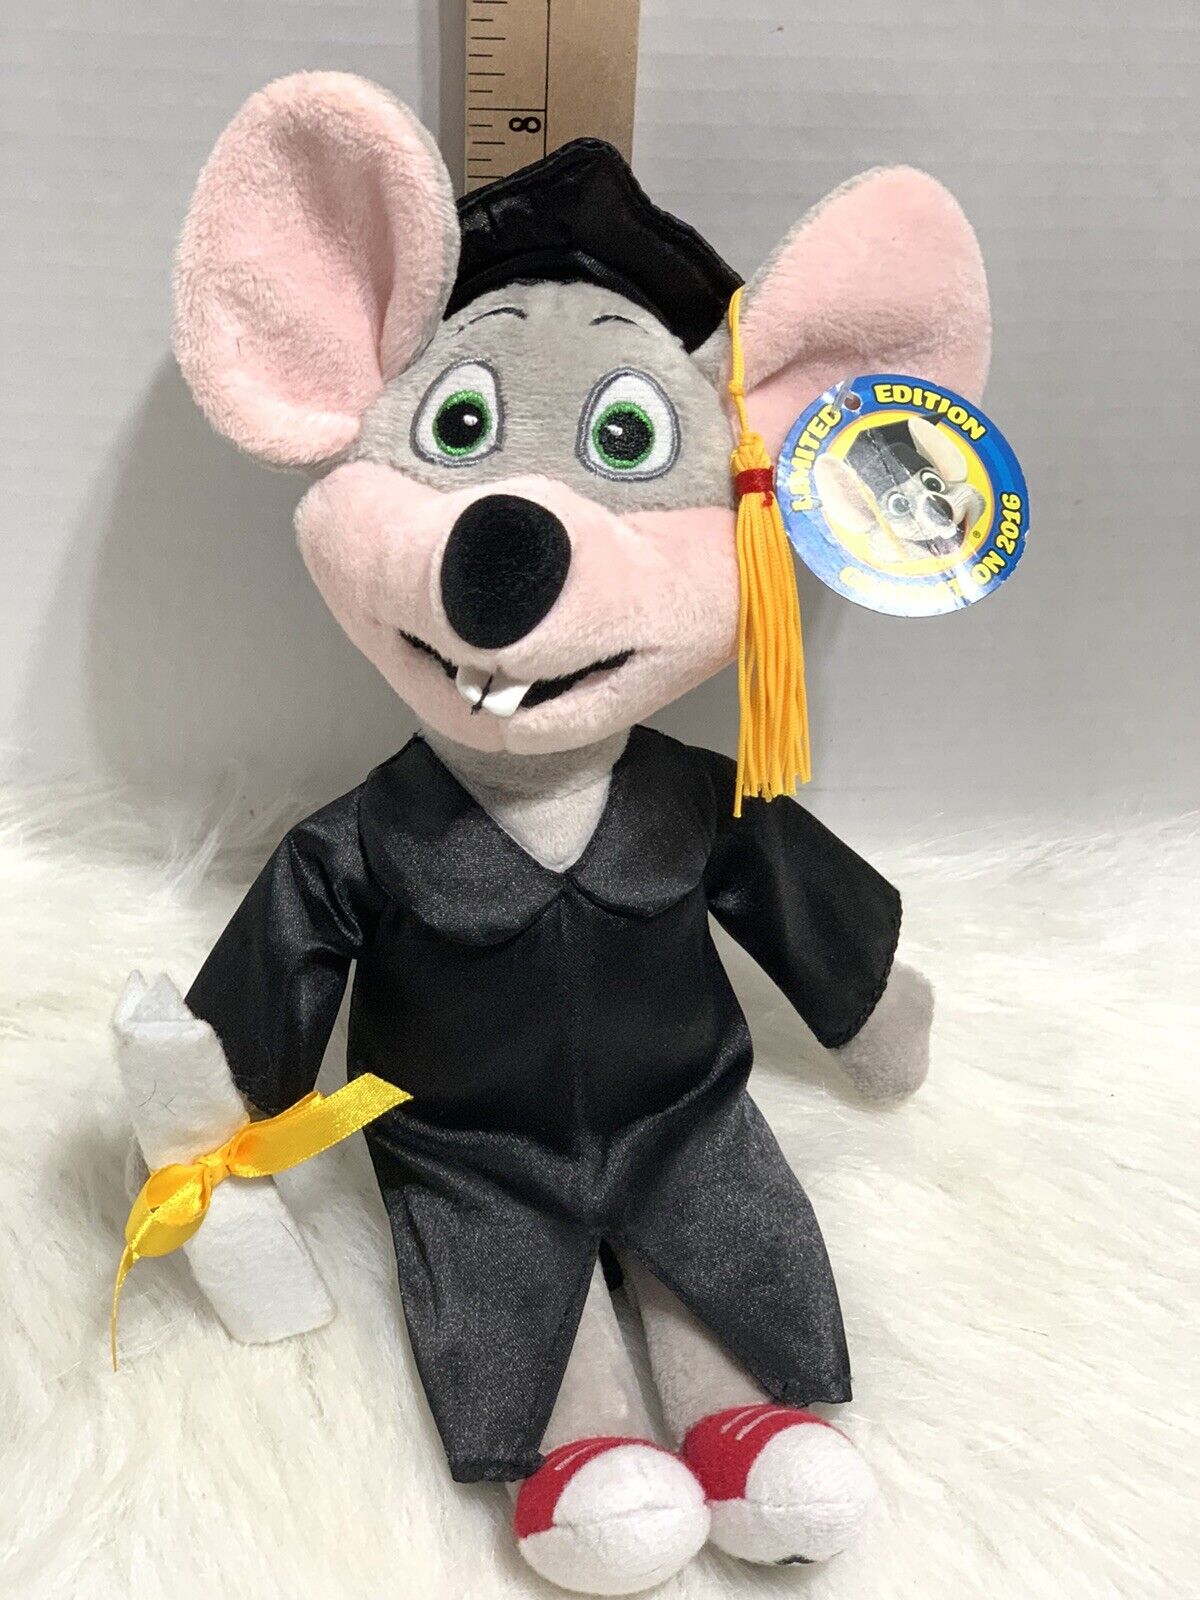 2016 Chuck E Cheese’s Graduation New With Tag Plush Doll Limited Edition